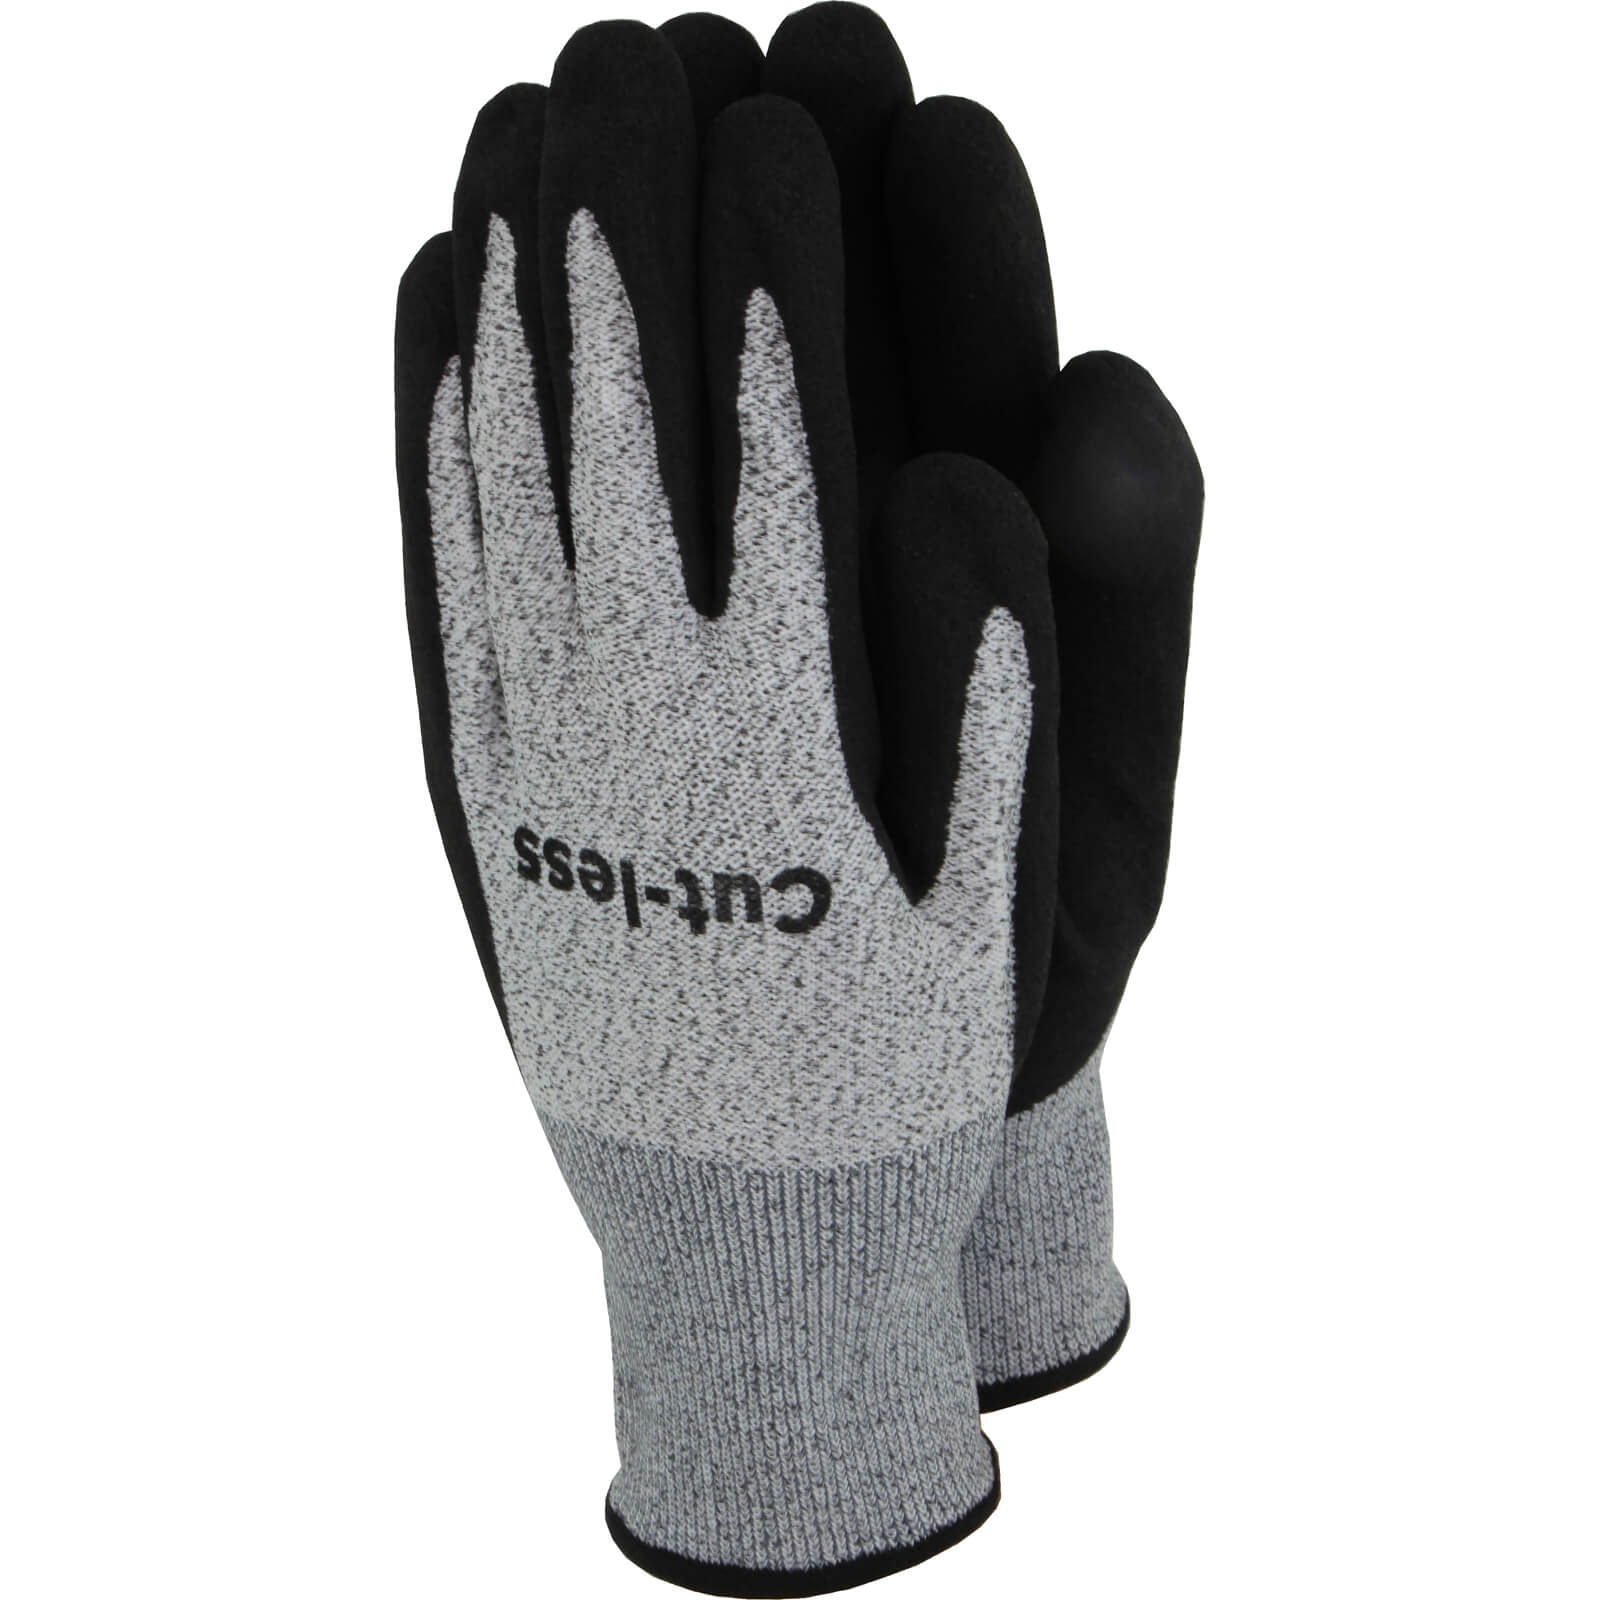 Image of Town and Country Cut Less Gloves Black / Grey M